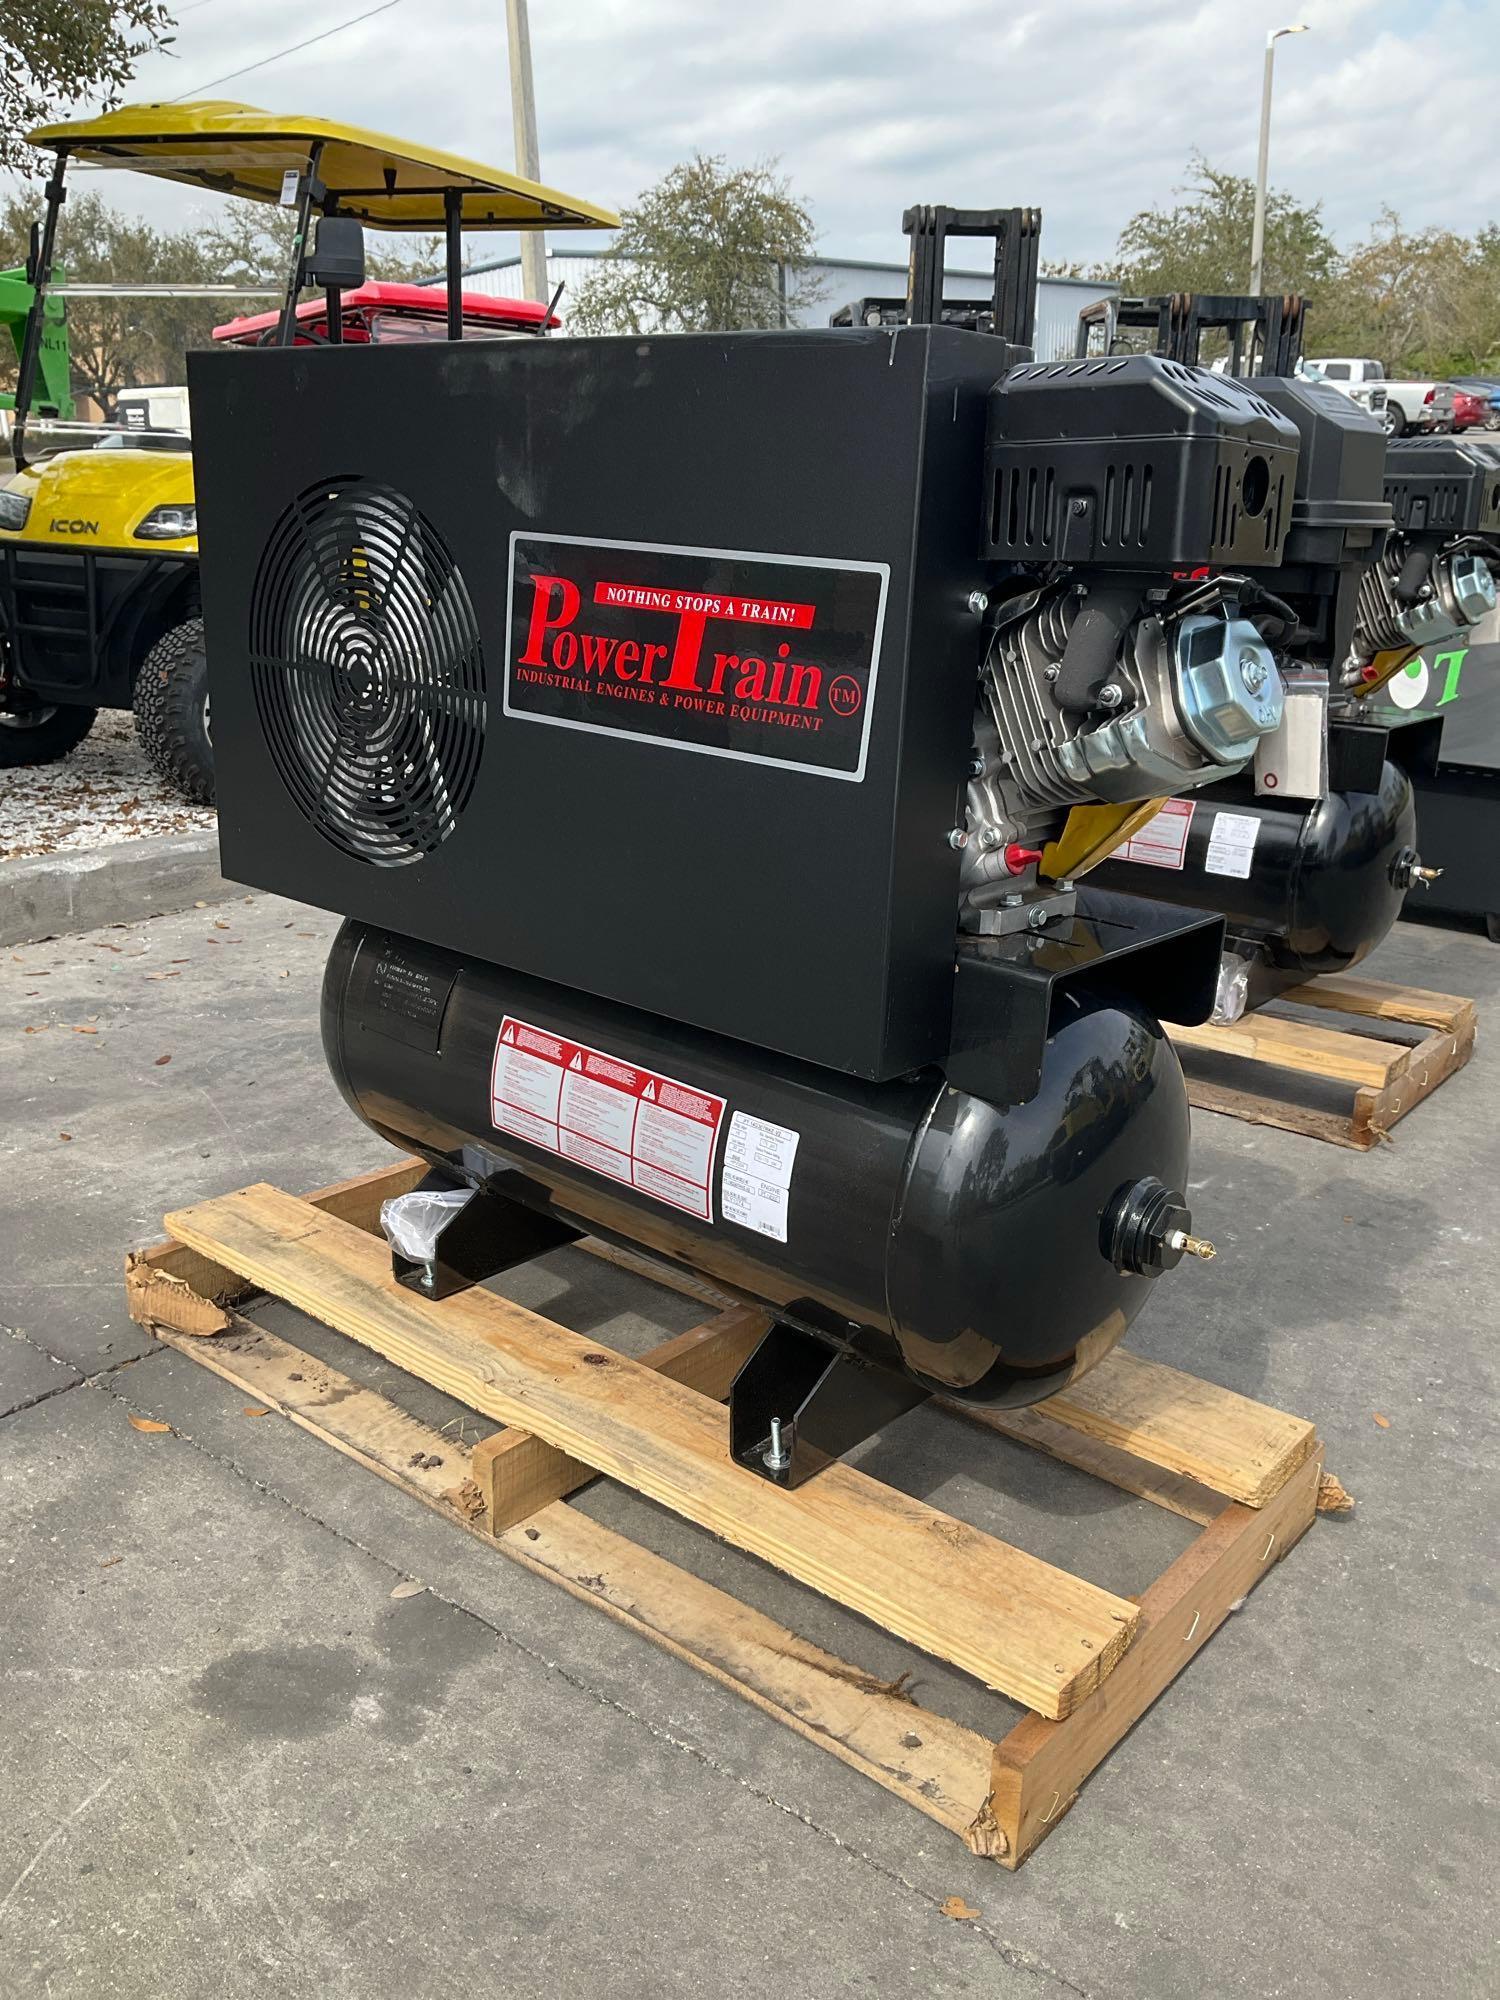 UNUSED POWER TRAIN AIR COMPRESSOR MODEL PT-14G30TRKE-V2, GAS POWERED, APPROX 175 MAX RATED PSI, A...